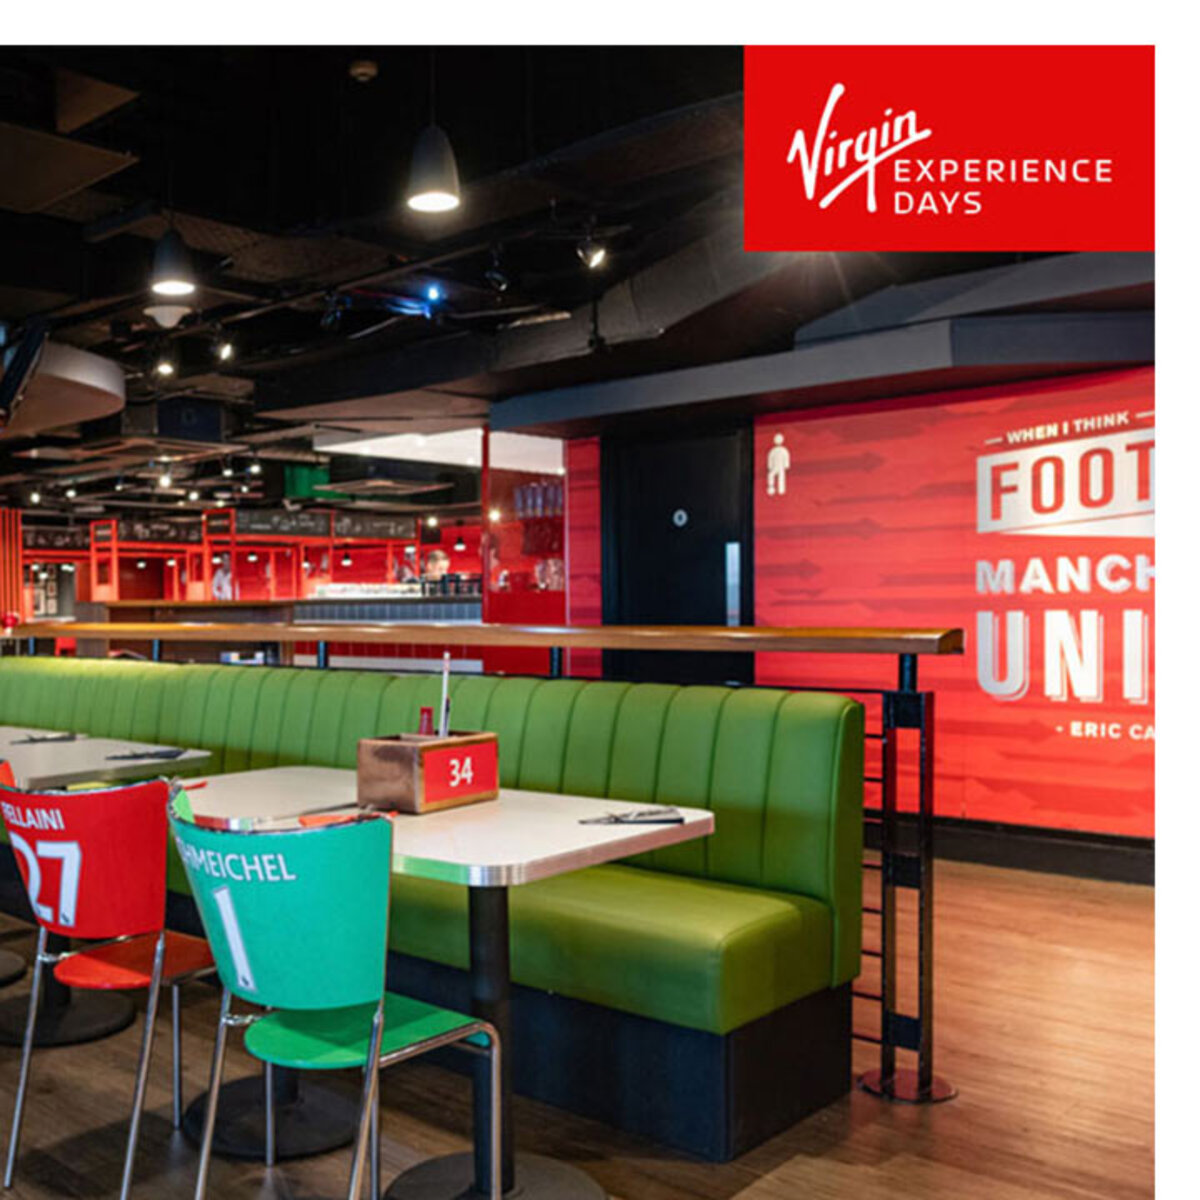 Virgin Experience Days Manchester United Football Club Stadium Tour with Meal in Red Café for Two People (16 Years +)